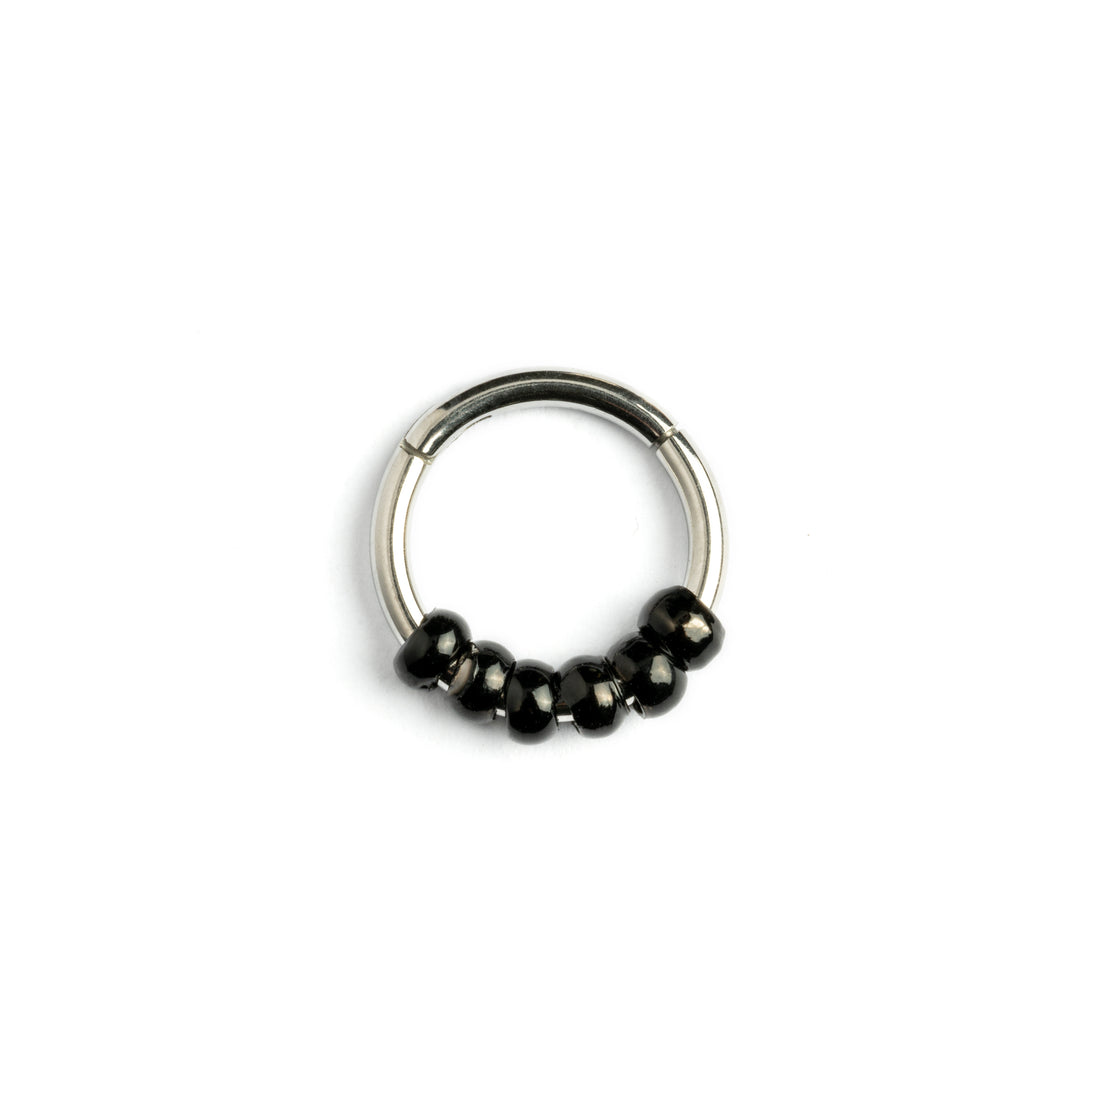 Hinged Segment Ring with Black Beads frontal view